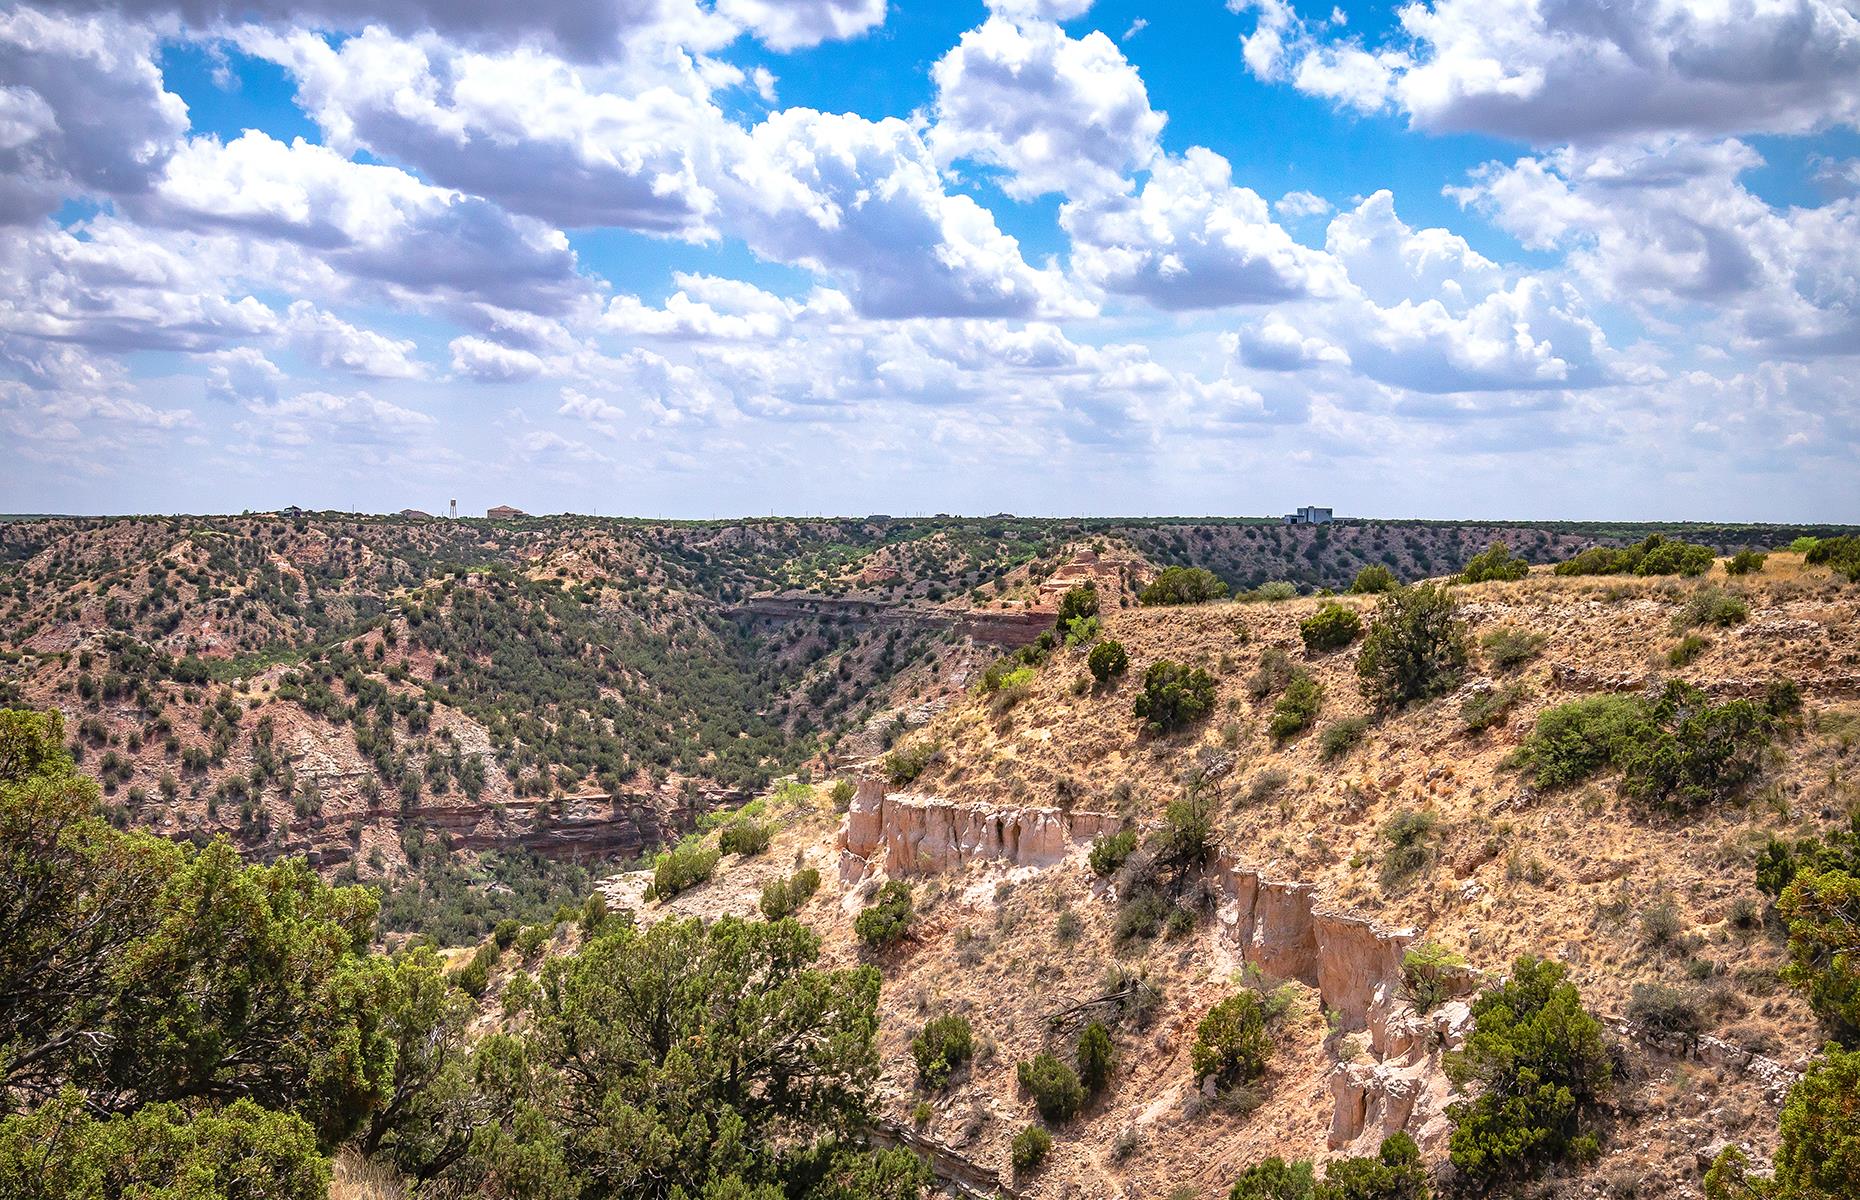 <p><a href="https://tpwd.texas.gov/state-parks/palo-duro-canyon">Palo Duro Canyon State Park</a>, located in the Texas Panhandle, is home to the second-largest canyon in the United States (trumped only by the famed Grand Canyon in Arizona). Its rugged red scarps are dotted with shrubs and when it comes to sunsets, Palo Duro rivals its better-known western counterpart. You can horse ride, bike or hike the park's miles of trails, spend the night in a rustic cabin and even see live music at the park's open-air amphitheater. </p>